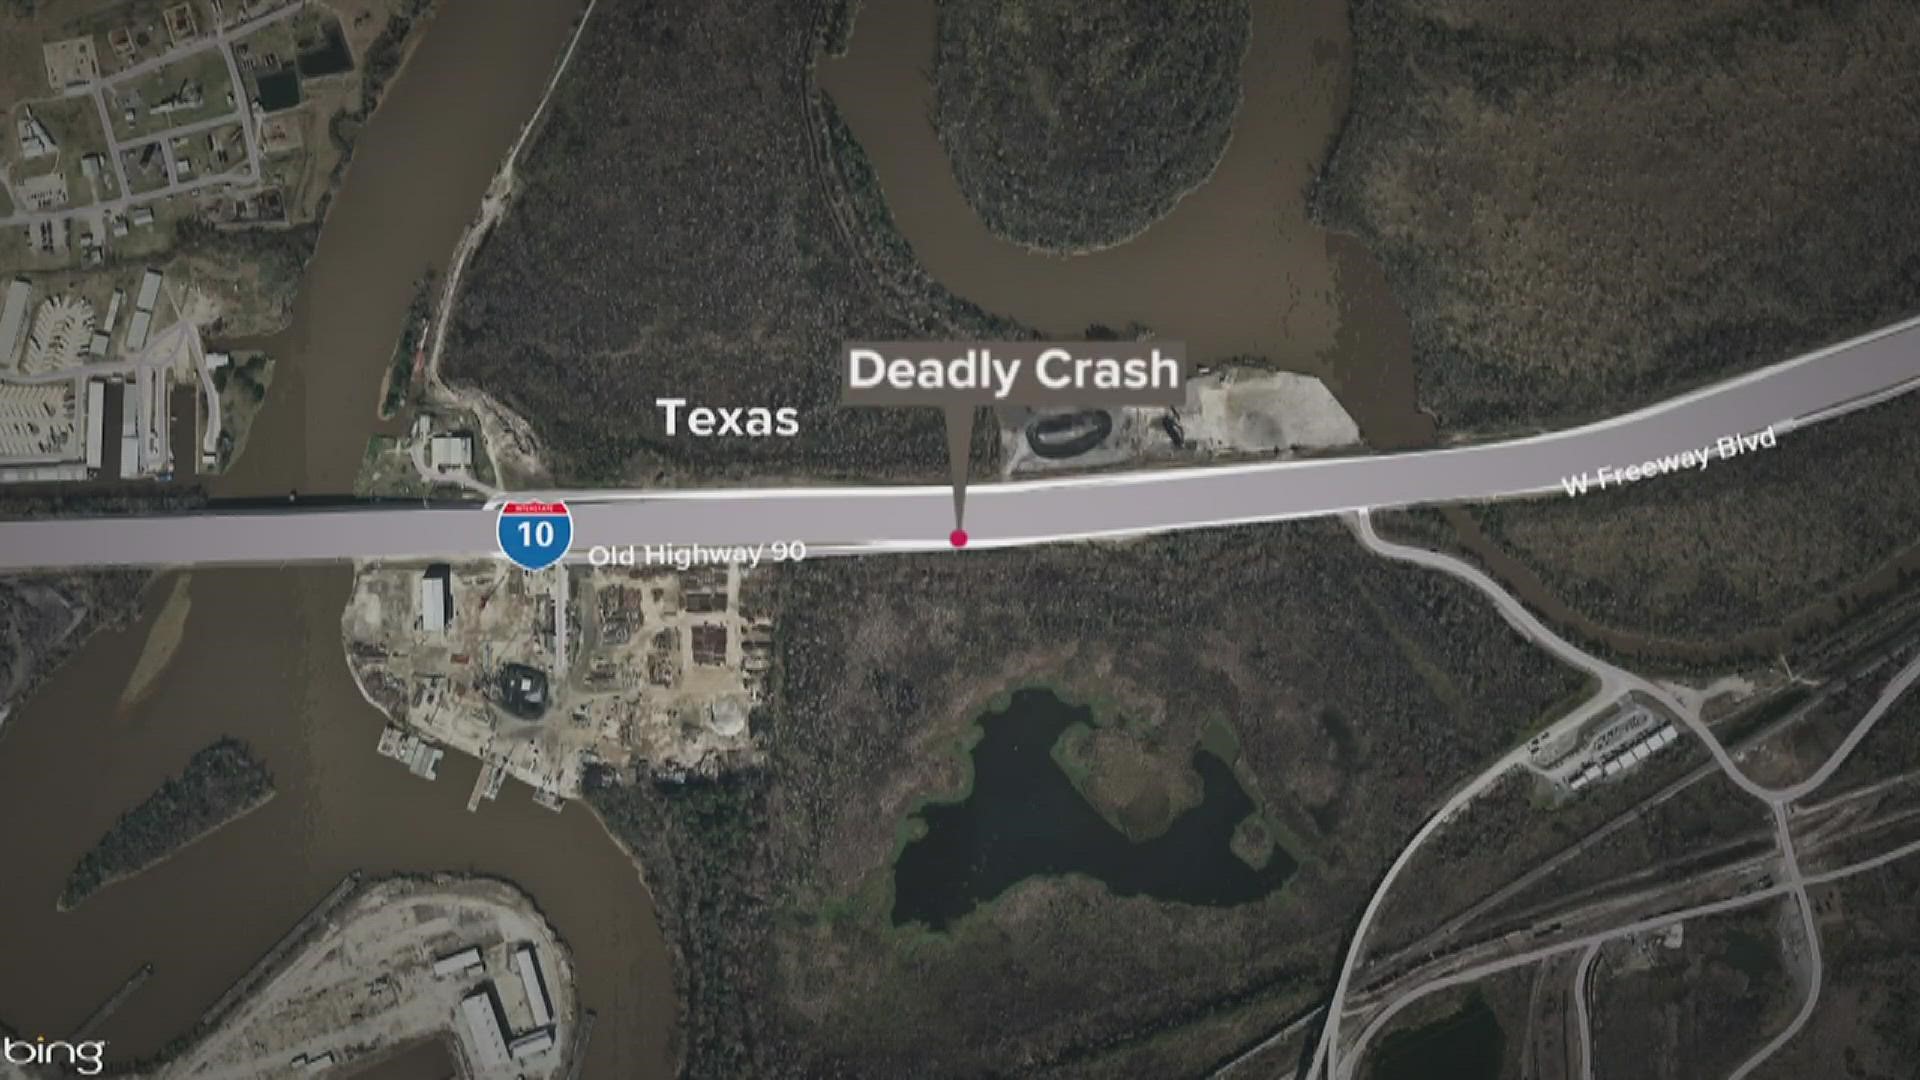 The driver was taken by ambulance to a Southeast Texas hospital where he was pronounced dead.